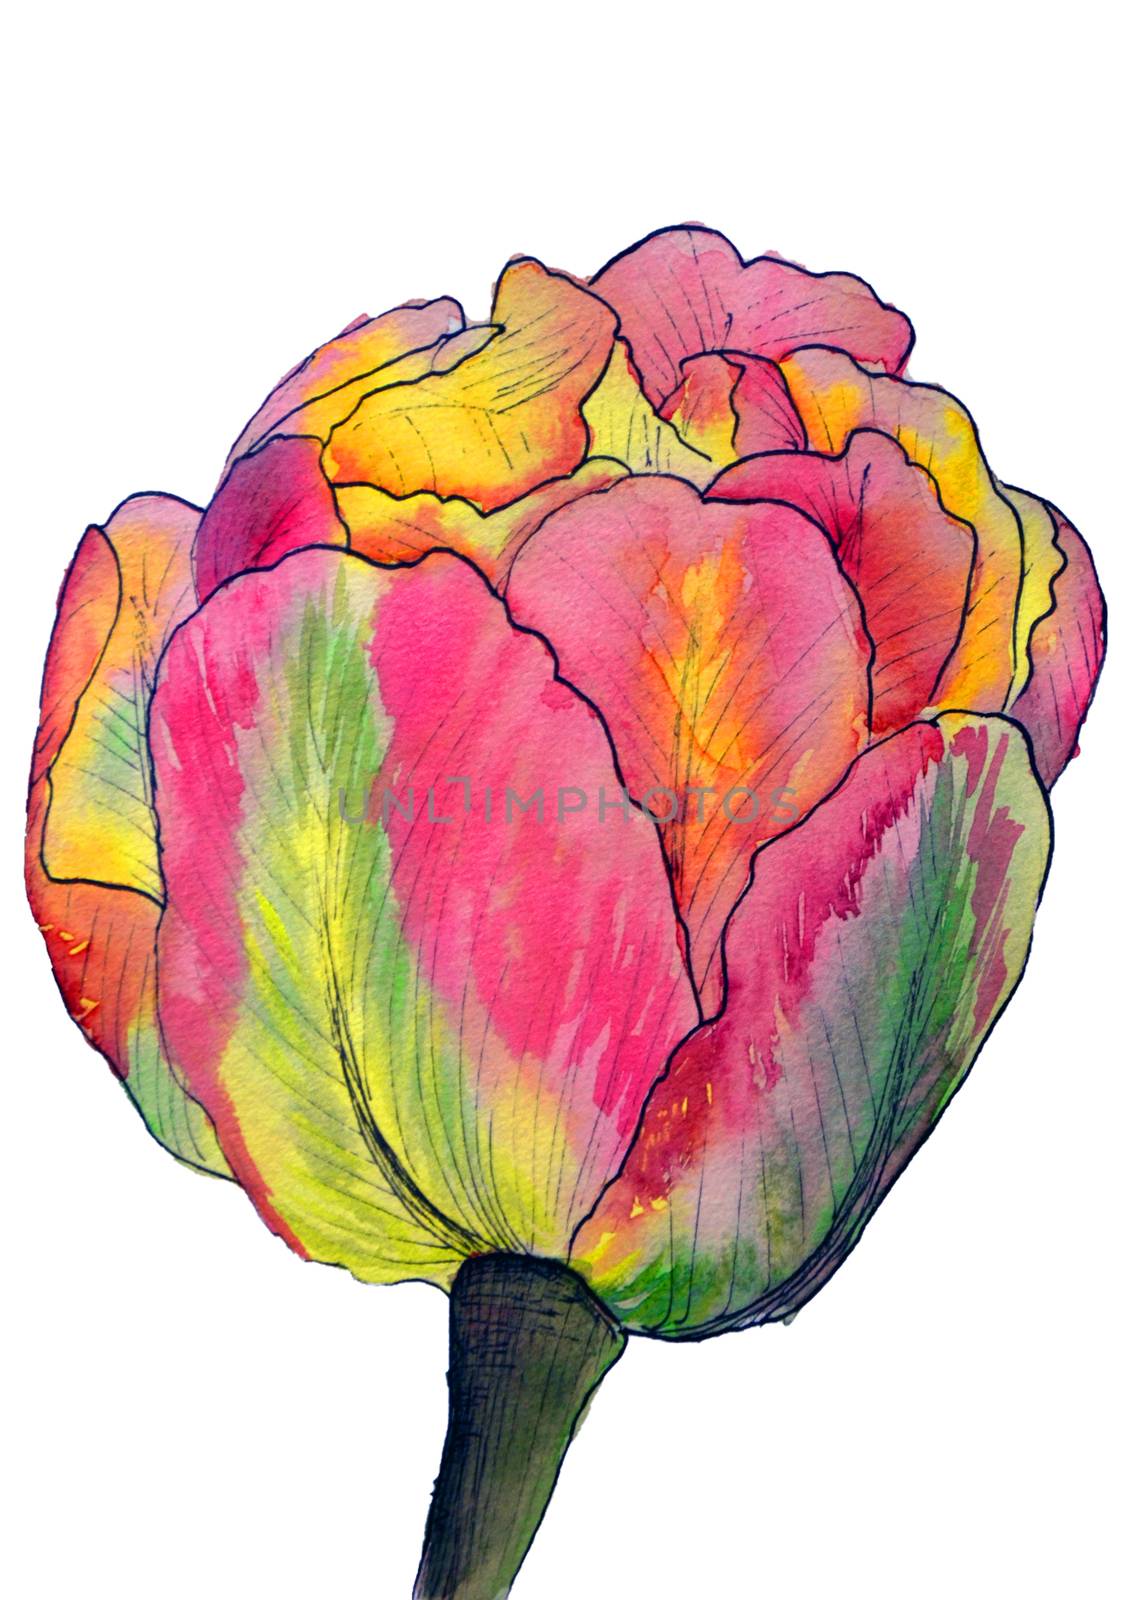 Watercolor magic flower tulip isolated on the white background.Flower of love.Pink,rose,violet,purple,red petals.Beautiful greeting,wedding or invitation card.